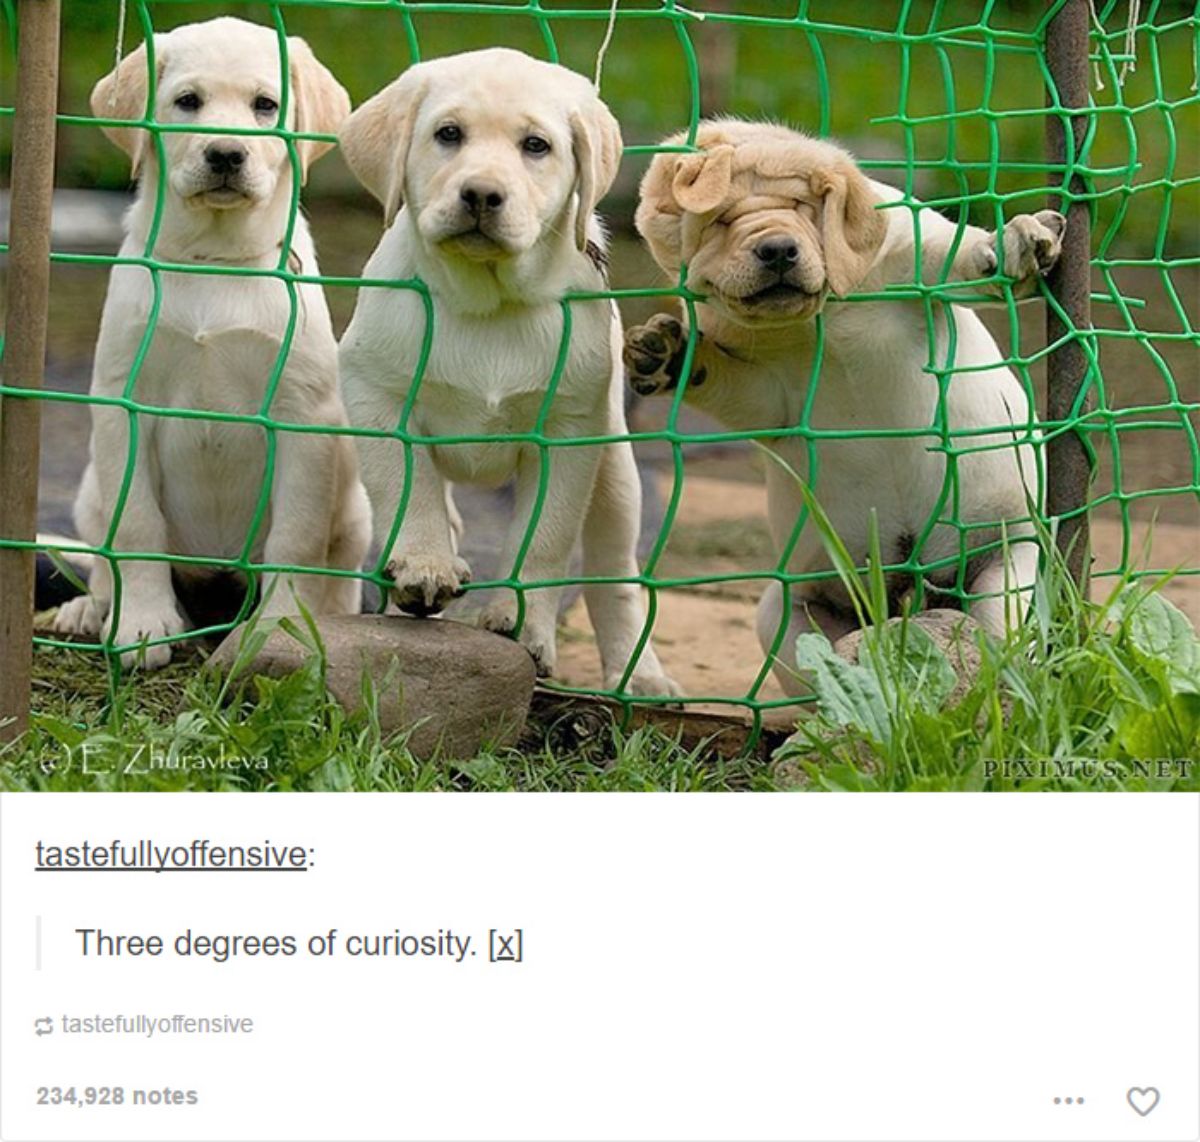 tumblr post of 3 yellow labrador puppies, 1st behind a fence, 2nd with head through a hole and 3rd with the face smushed through fence with caption saying 3 degrees of curiosity